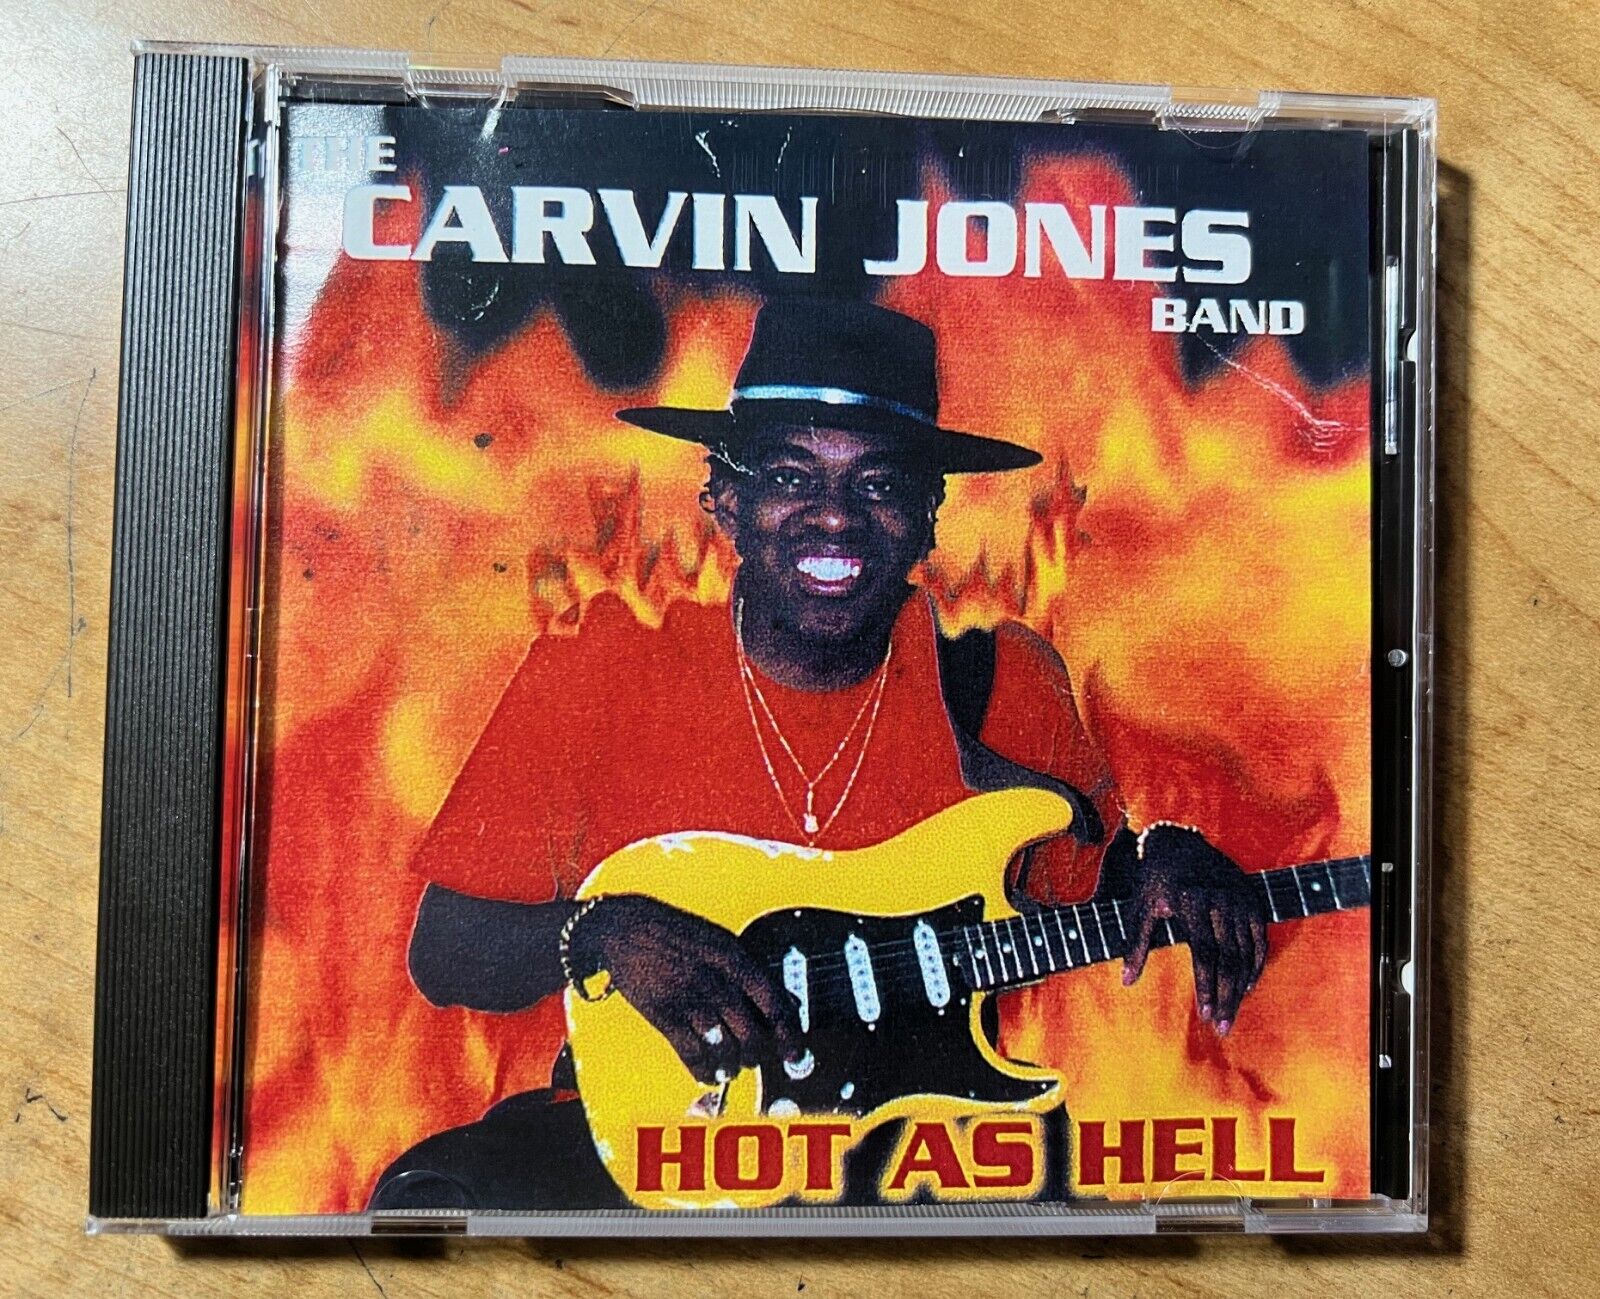 Hot As Hell CD by The Carvin Jones Band * RARE * - SIGNED 2000